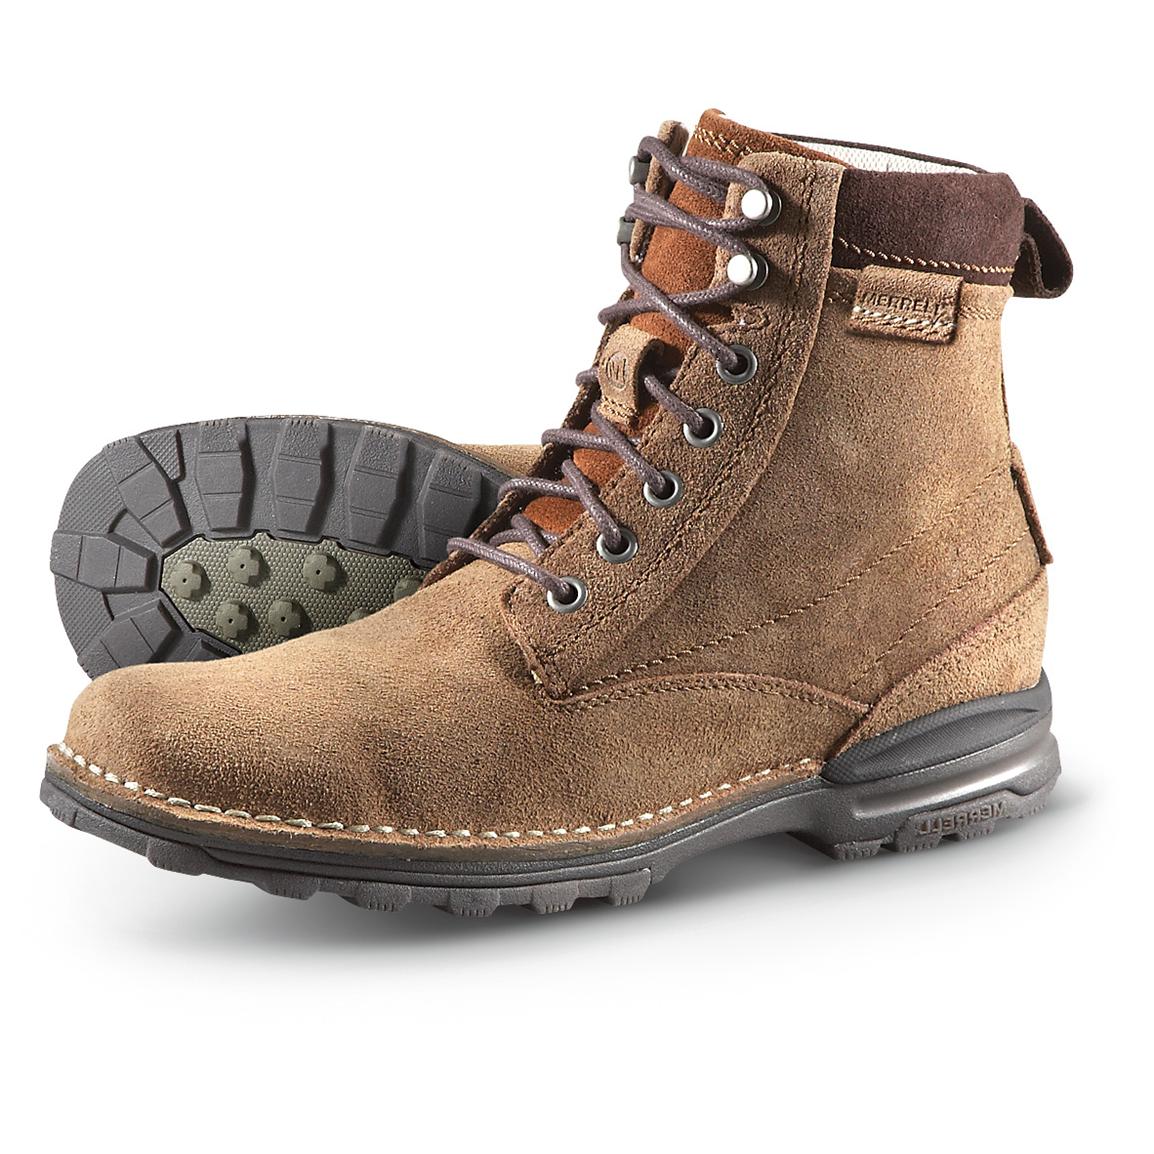 Men's Merrell® Perdal Hiking Boots, Bison - 283035, Work Boots at ...